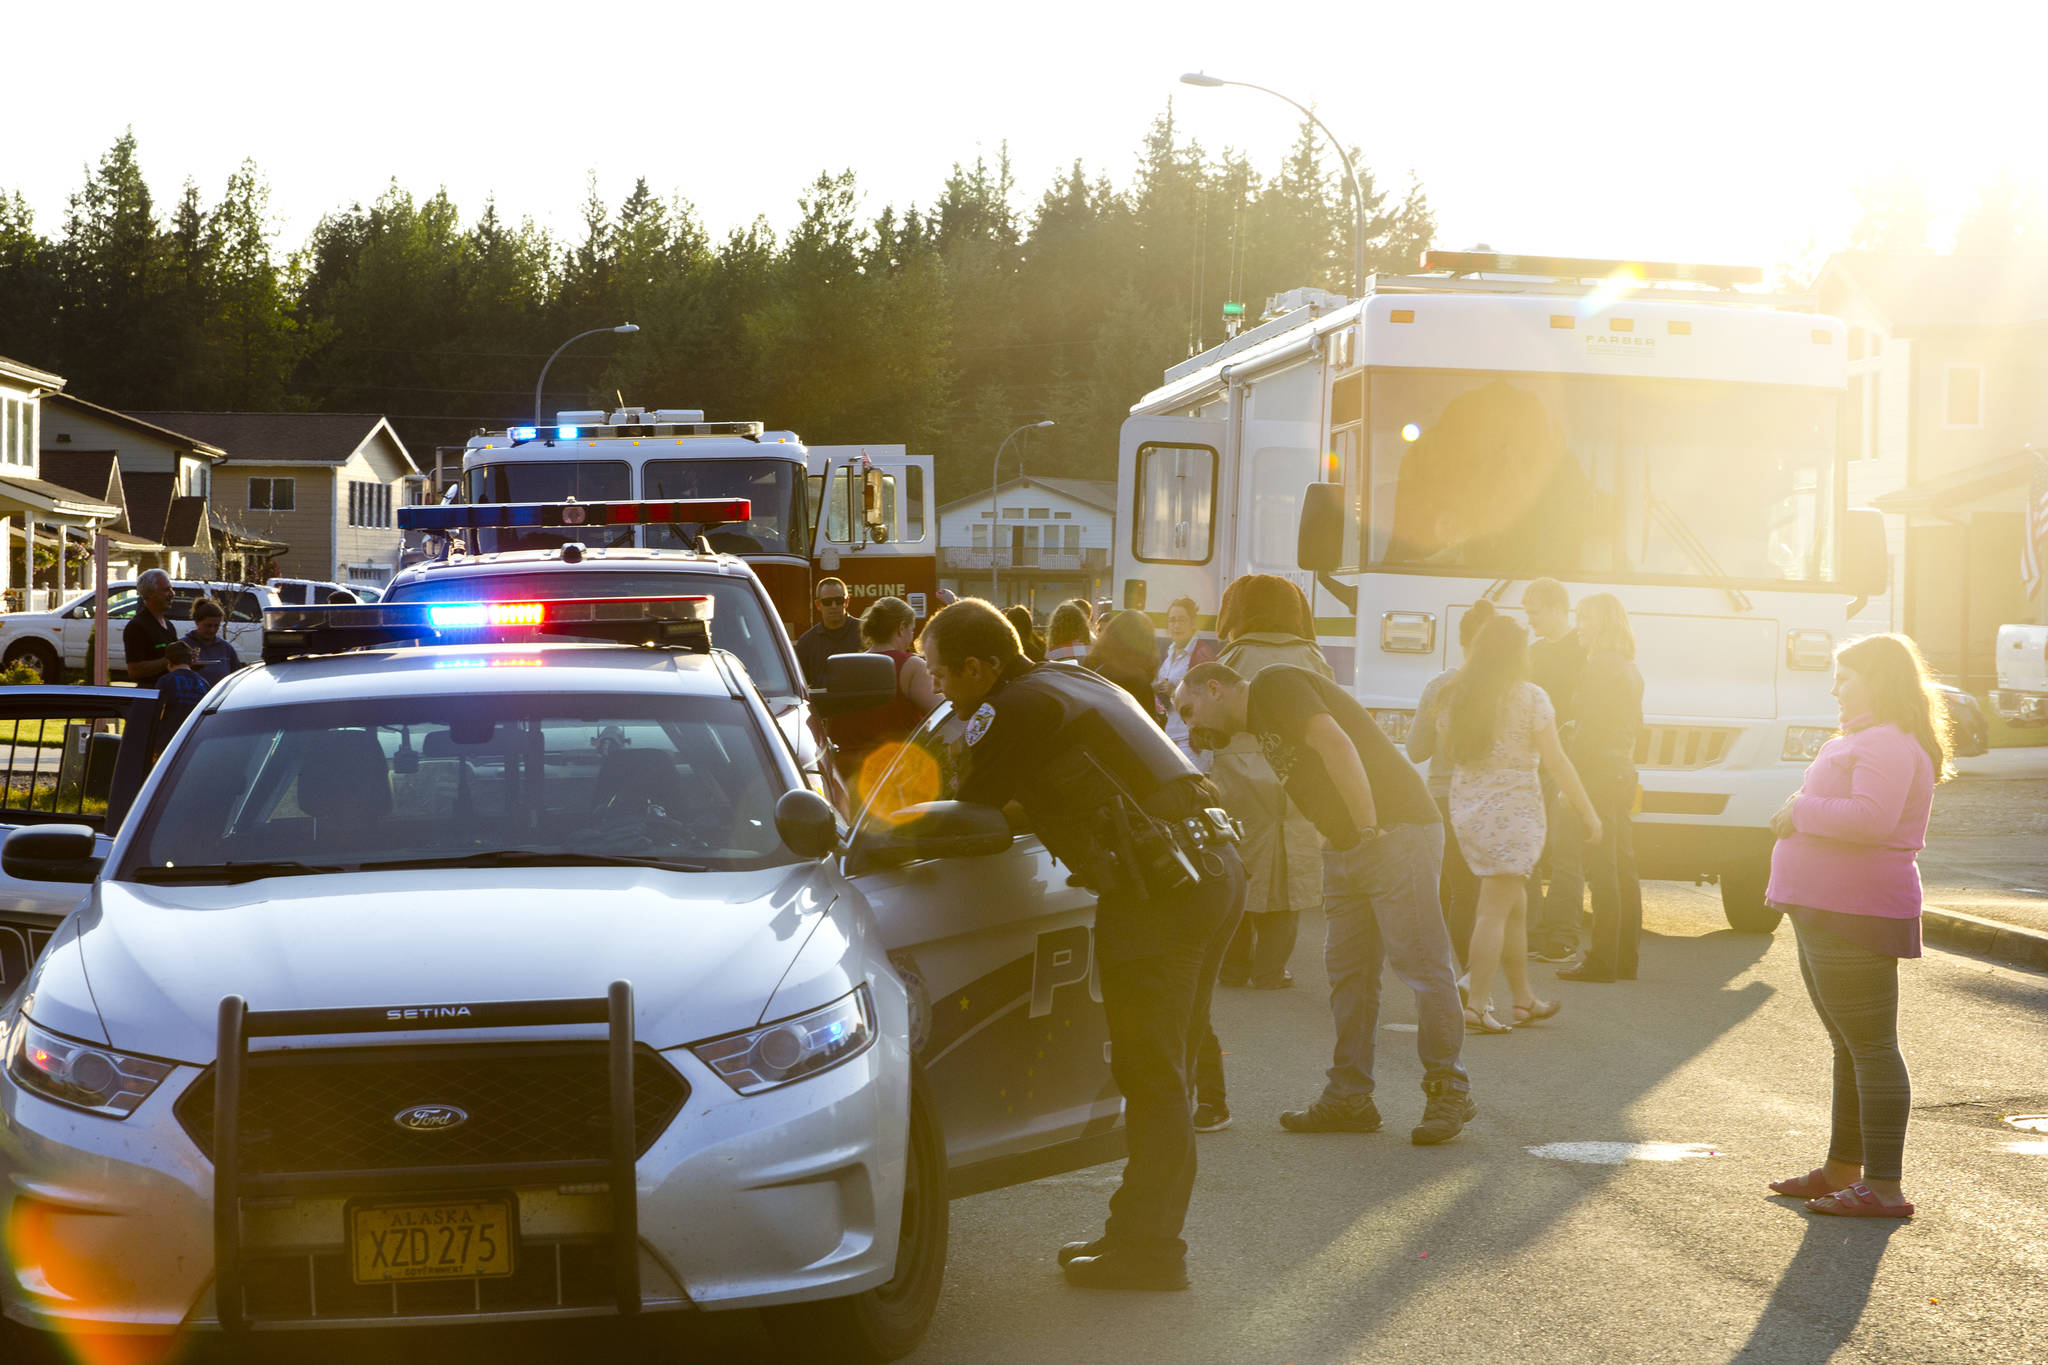 The Juneau Police Department organized participation in the National Night Out for all Juneau public services, including Capital City Fire/Rescue, the Alaska State Troopers, and other uniformed and nonuniformed public services, Aug. 6, 2019. (Michael S. Lockett | Juneau Empire)